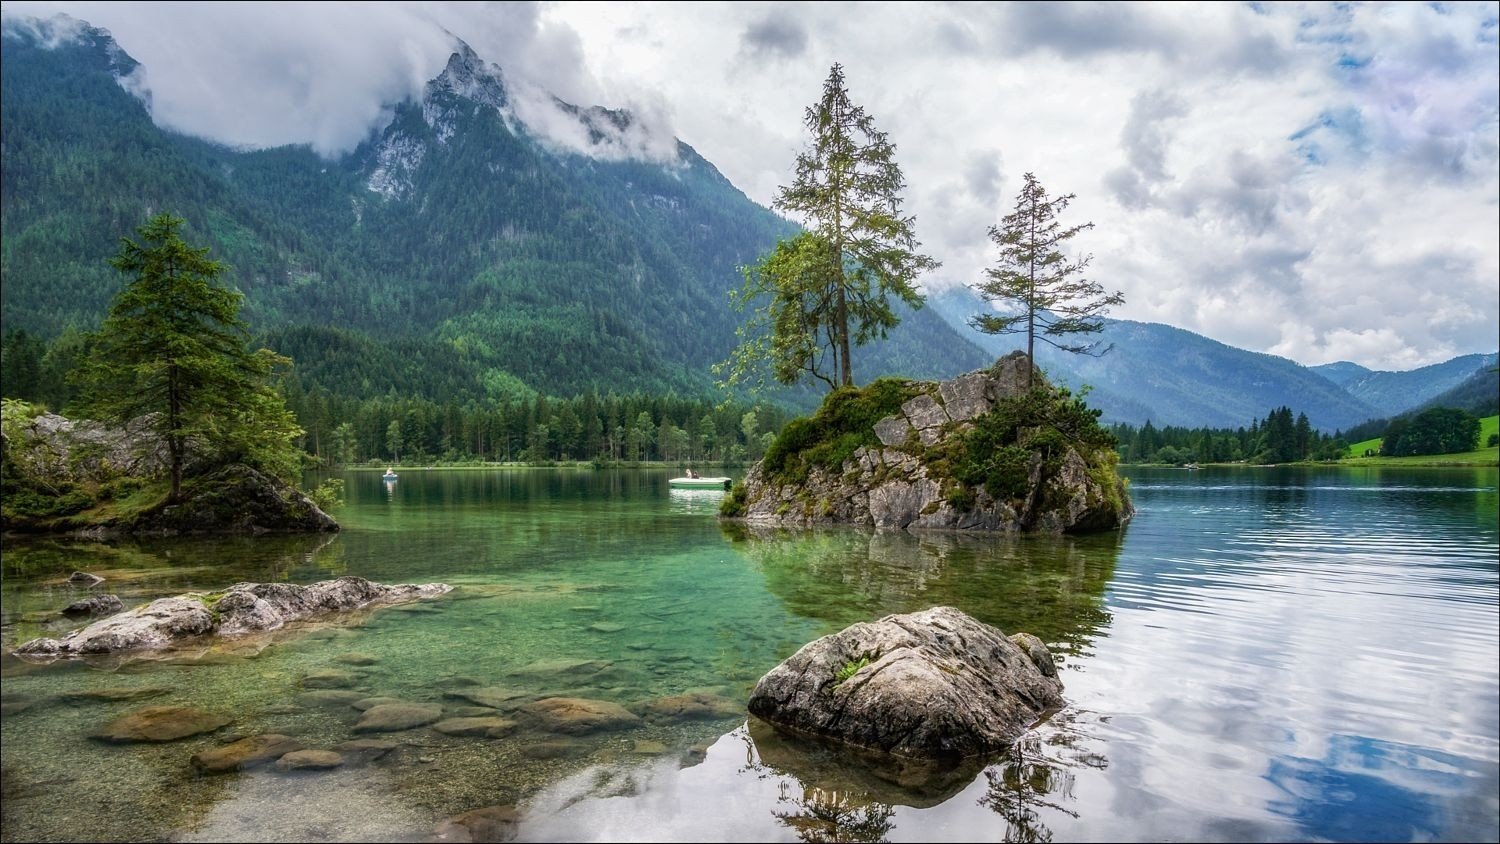 Wallpaper, landscape, forest, mountains, boat, lake, nature, reflection, photography, clouds, Germany, river, rocks, national park, fjord, valley, pine trees, wilderness, stream, spring, Rapid, tarn, loch, mountainous landforms, mountain range 1500x844